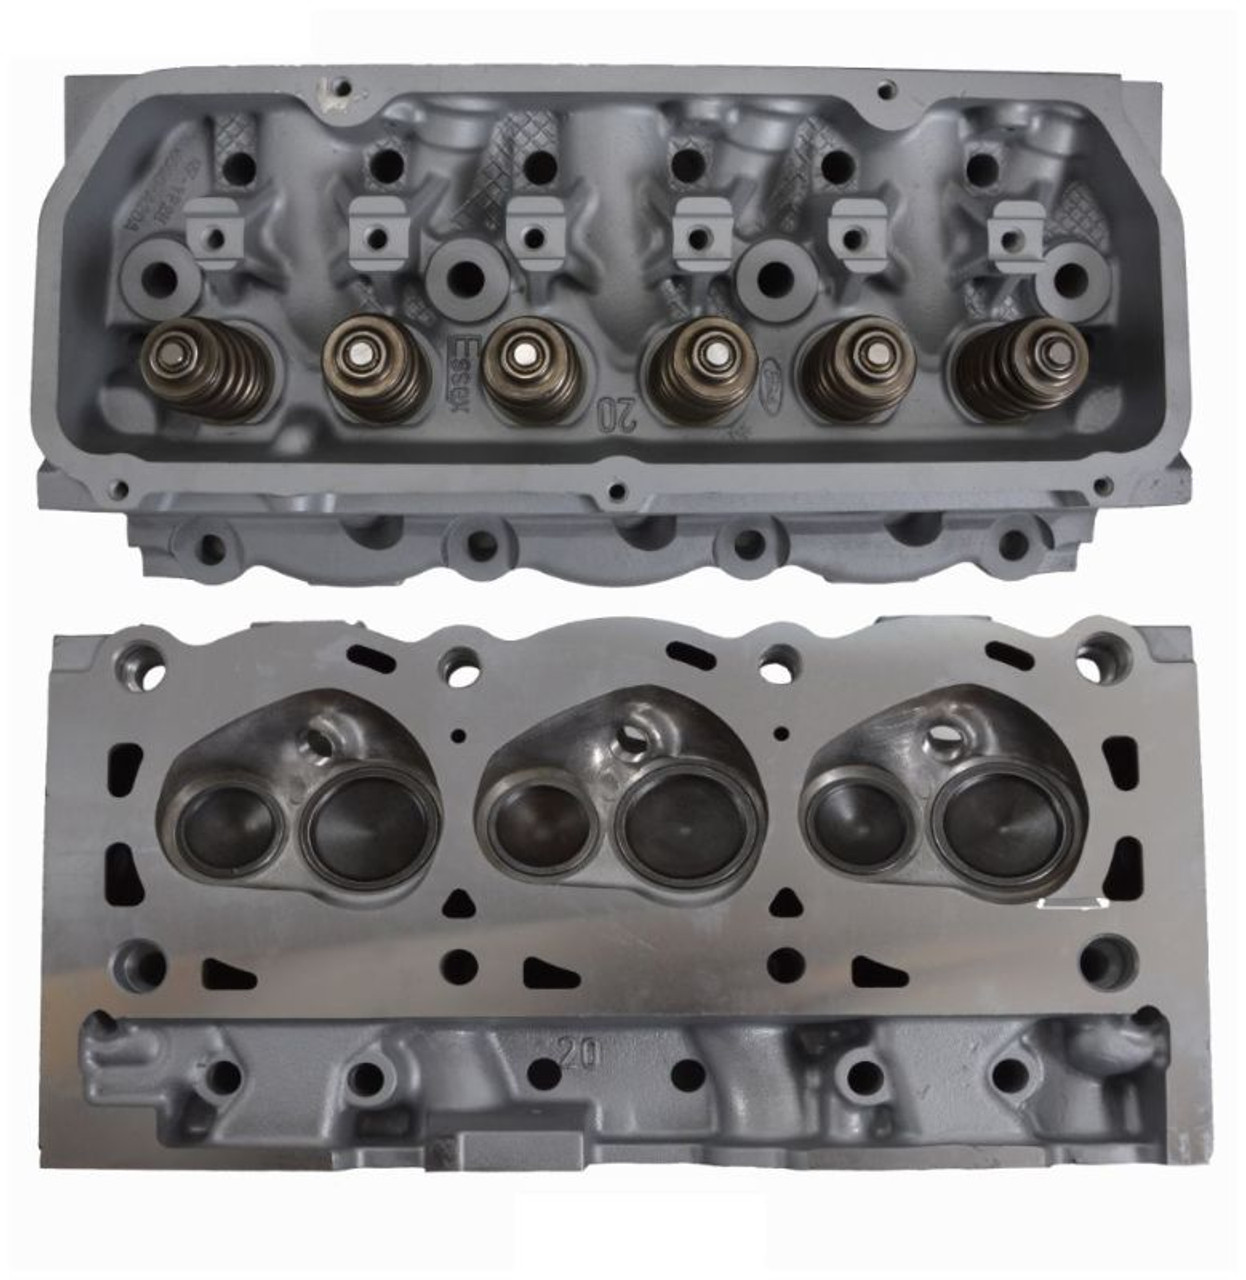 2000 Ford E-150 Econoline 4.2L Engine Cylinder Head Assembly CH1036R -5